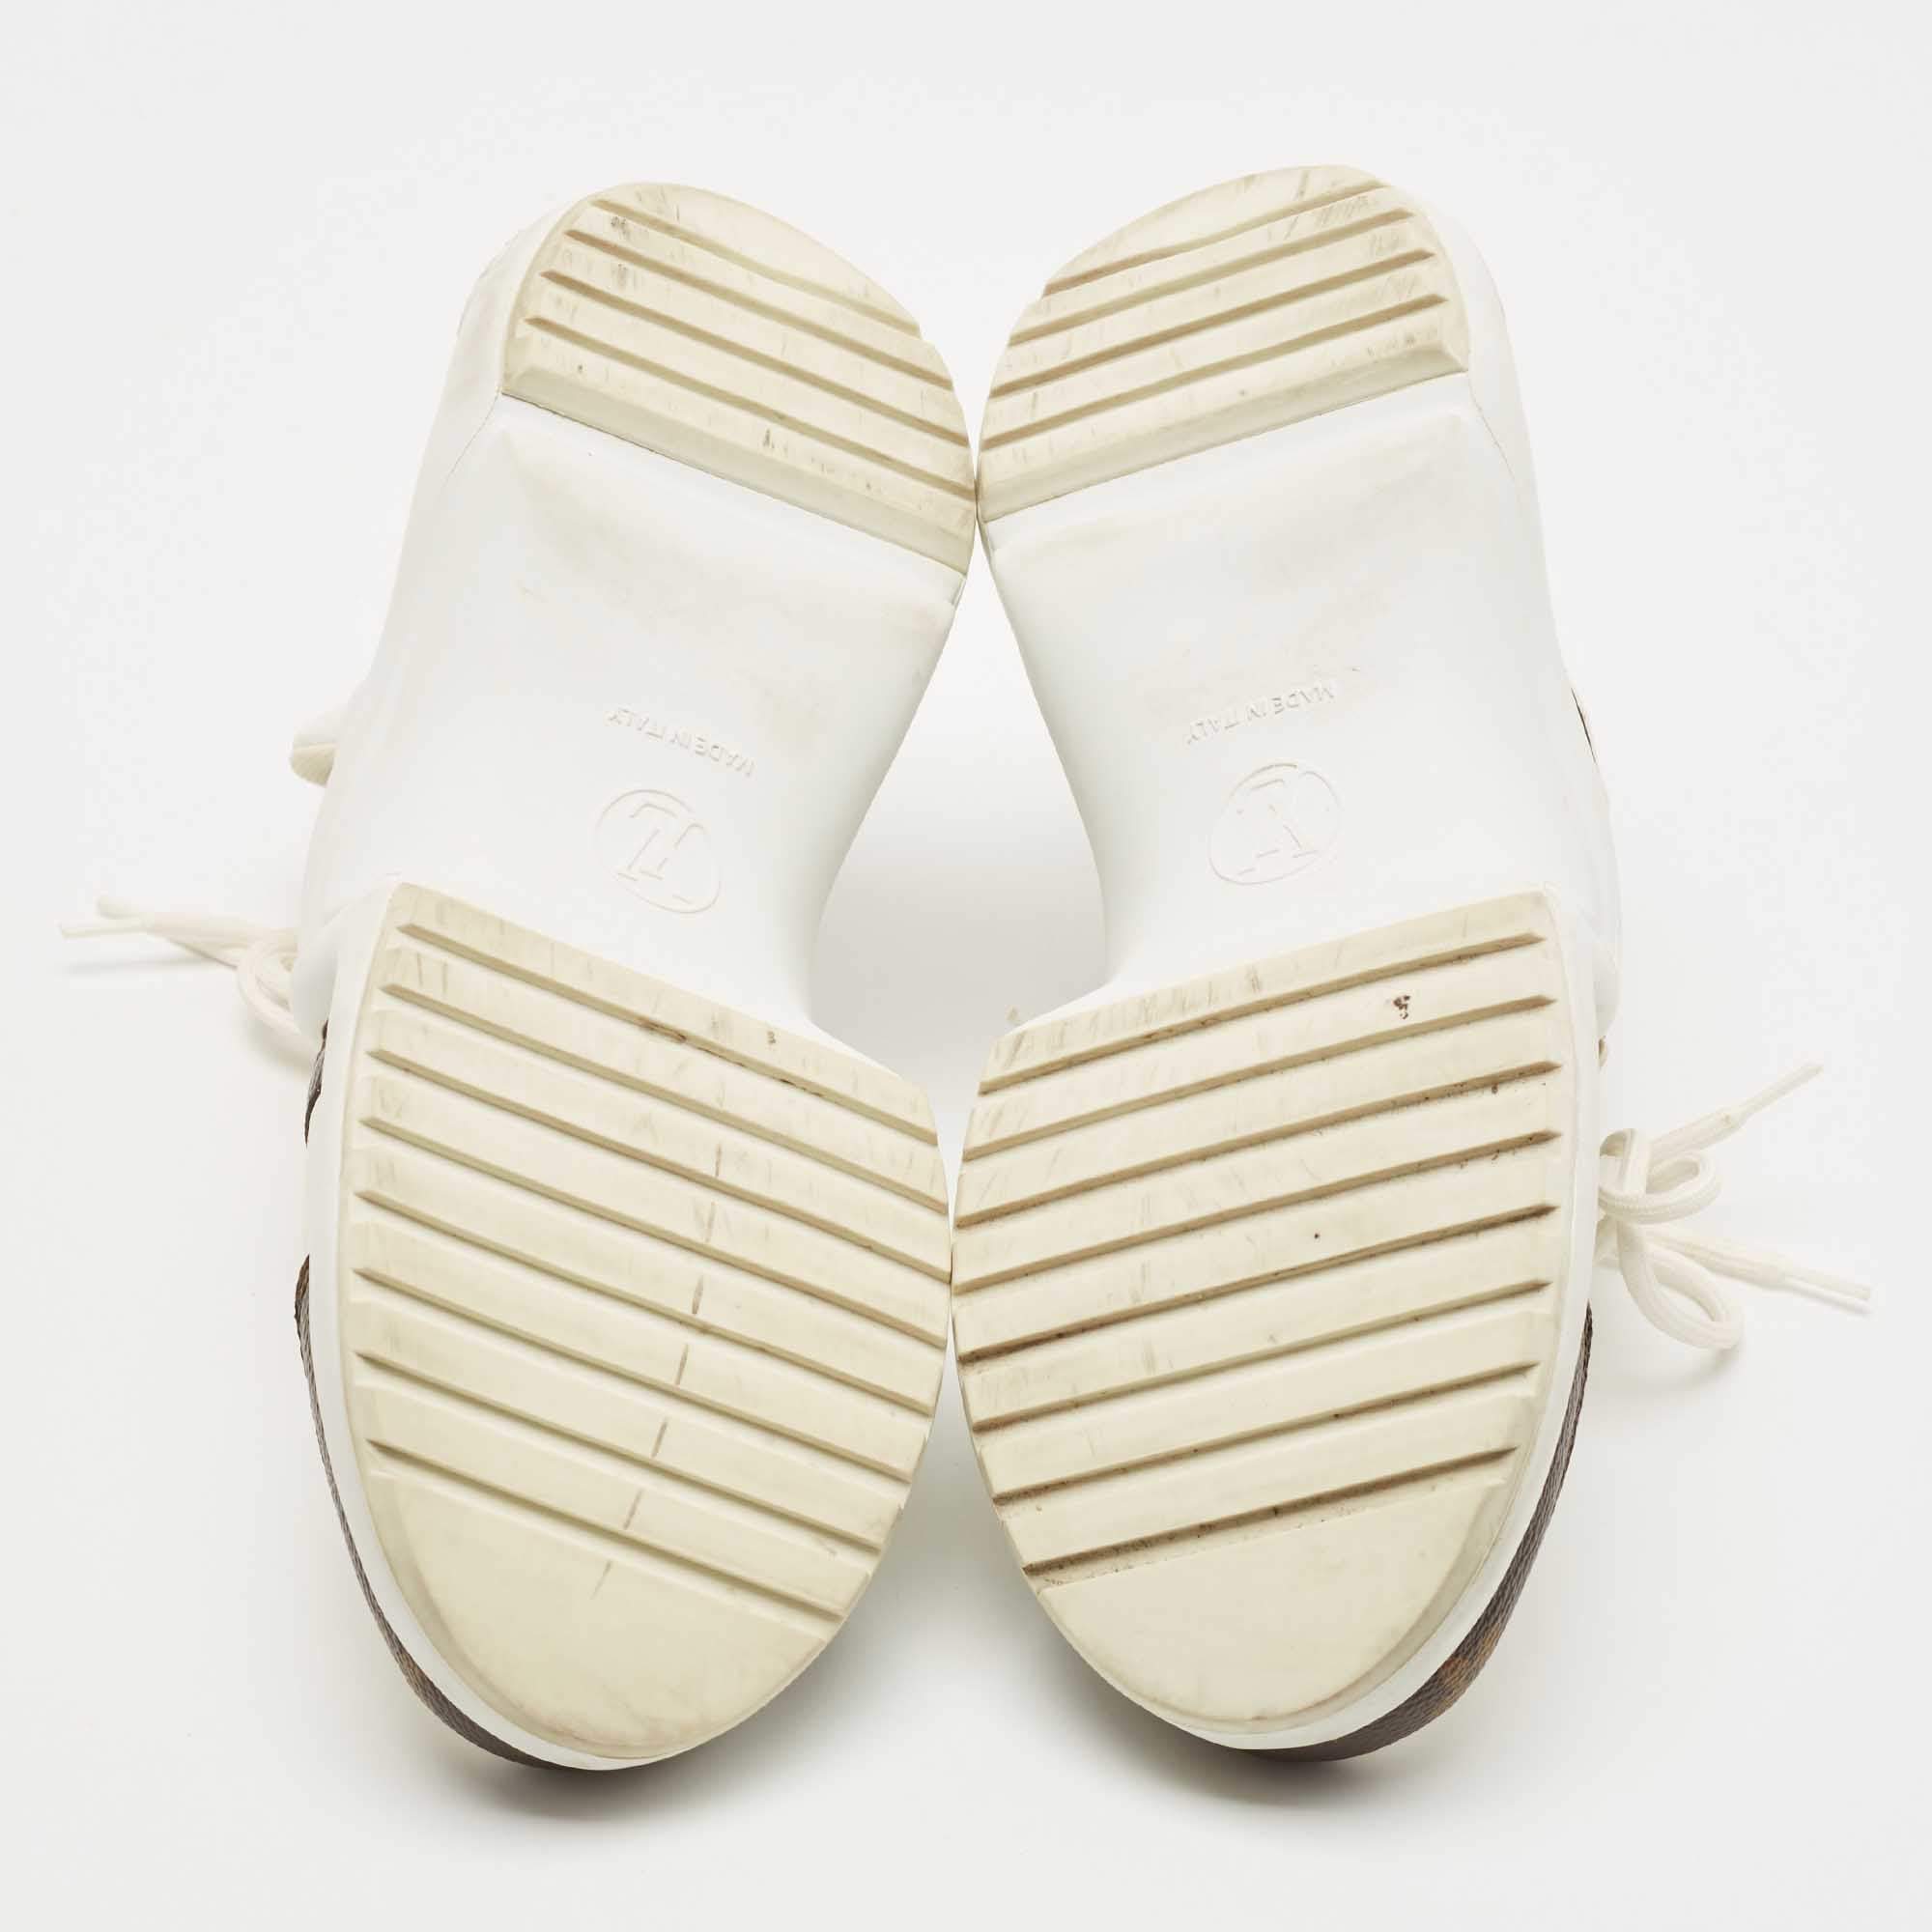 Archlight leather trainers Louis Vuitton White size 38.5 EU in Leather -  35876025